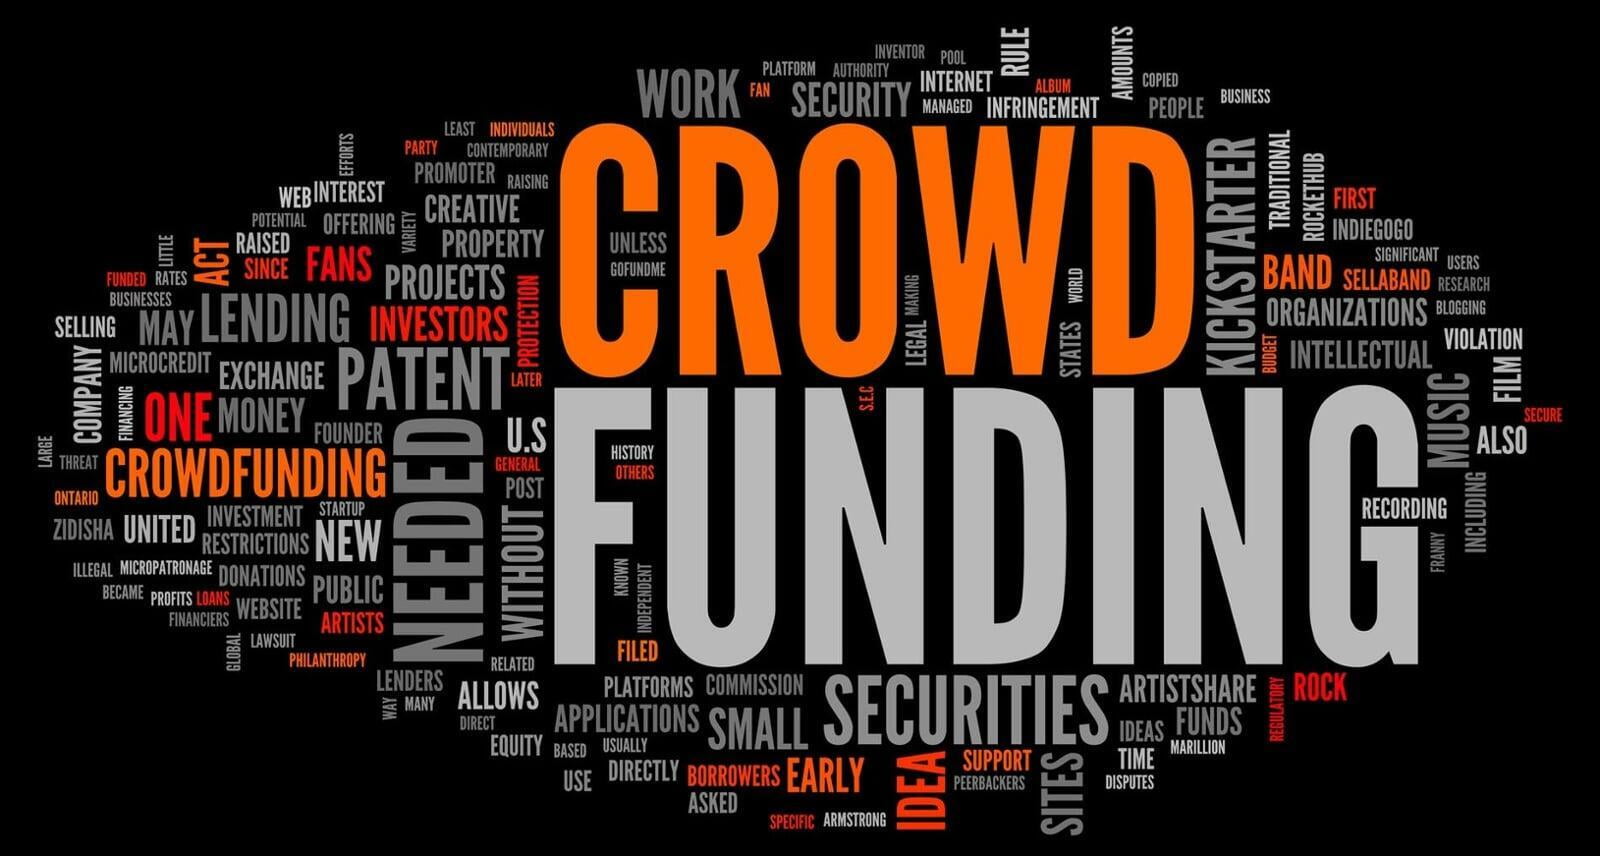 Crowdfunding And SEC Compliance For Start-Ups